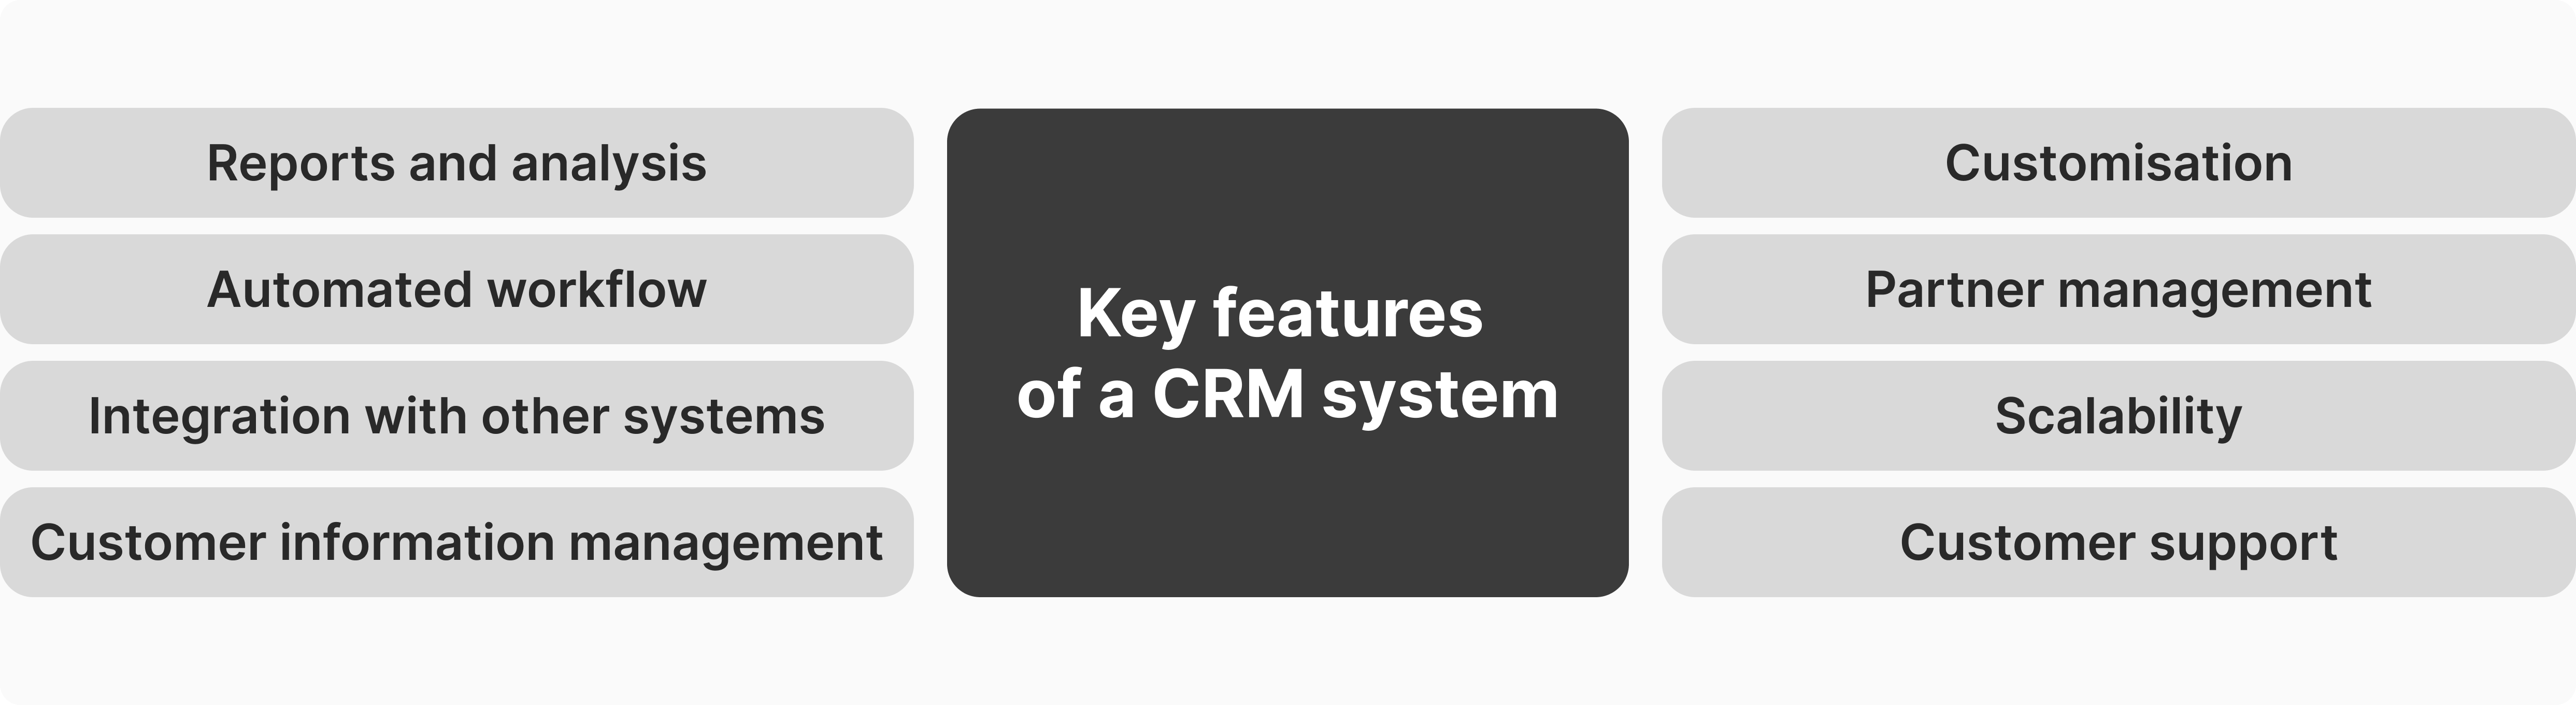 Key features of a CRM system